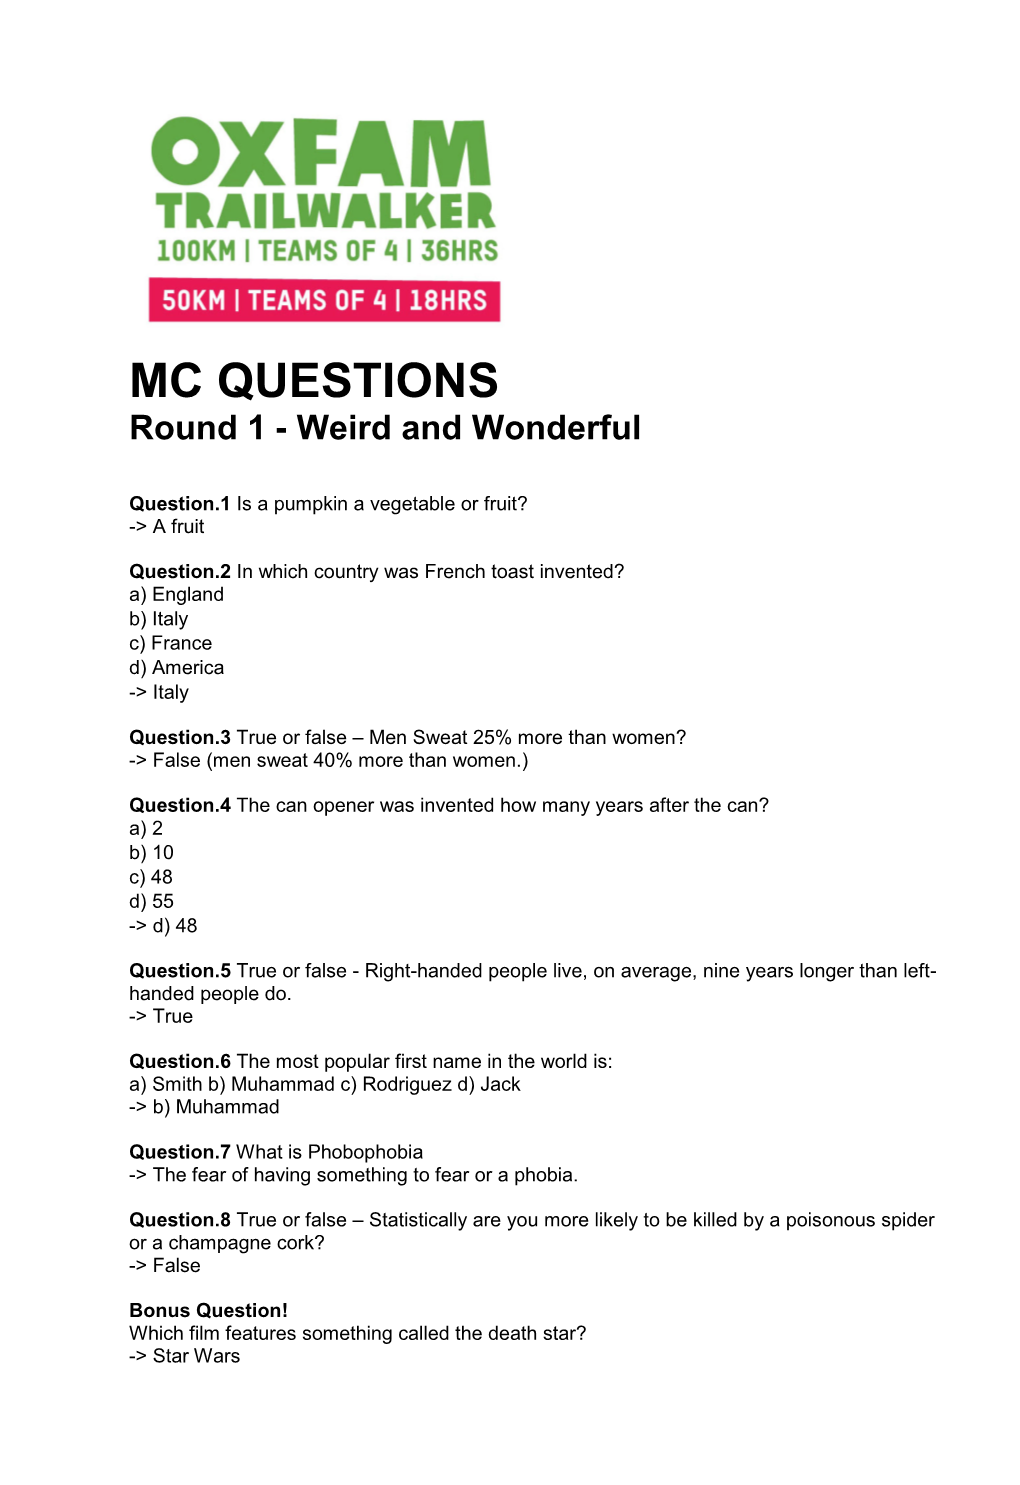 MC QUESTIONS Round 1 - Weird and Wonderful